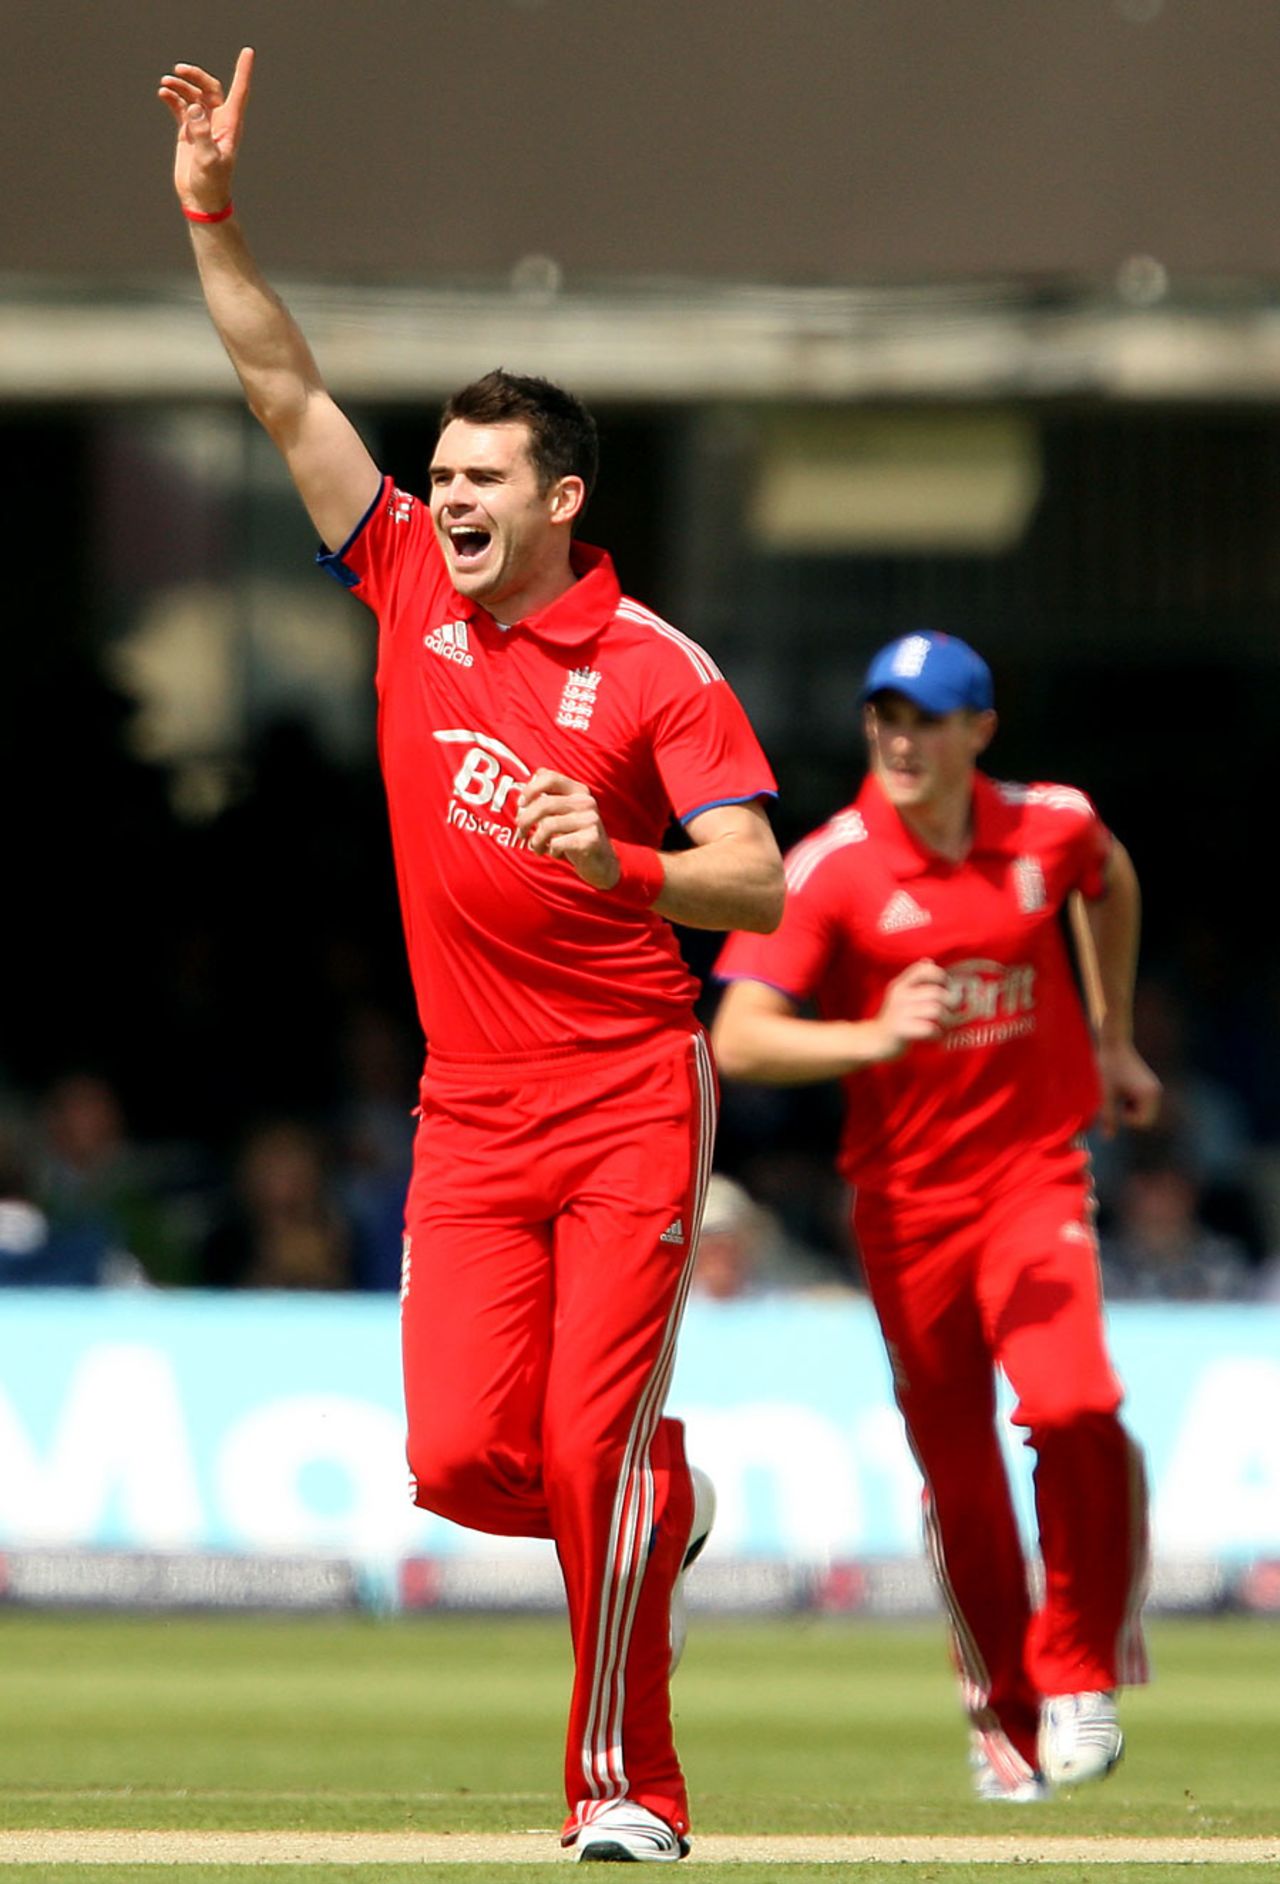 James Anderson struck twice in his first over, England v New Zealand, 1st ODI, Lord's, May 31, 2013